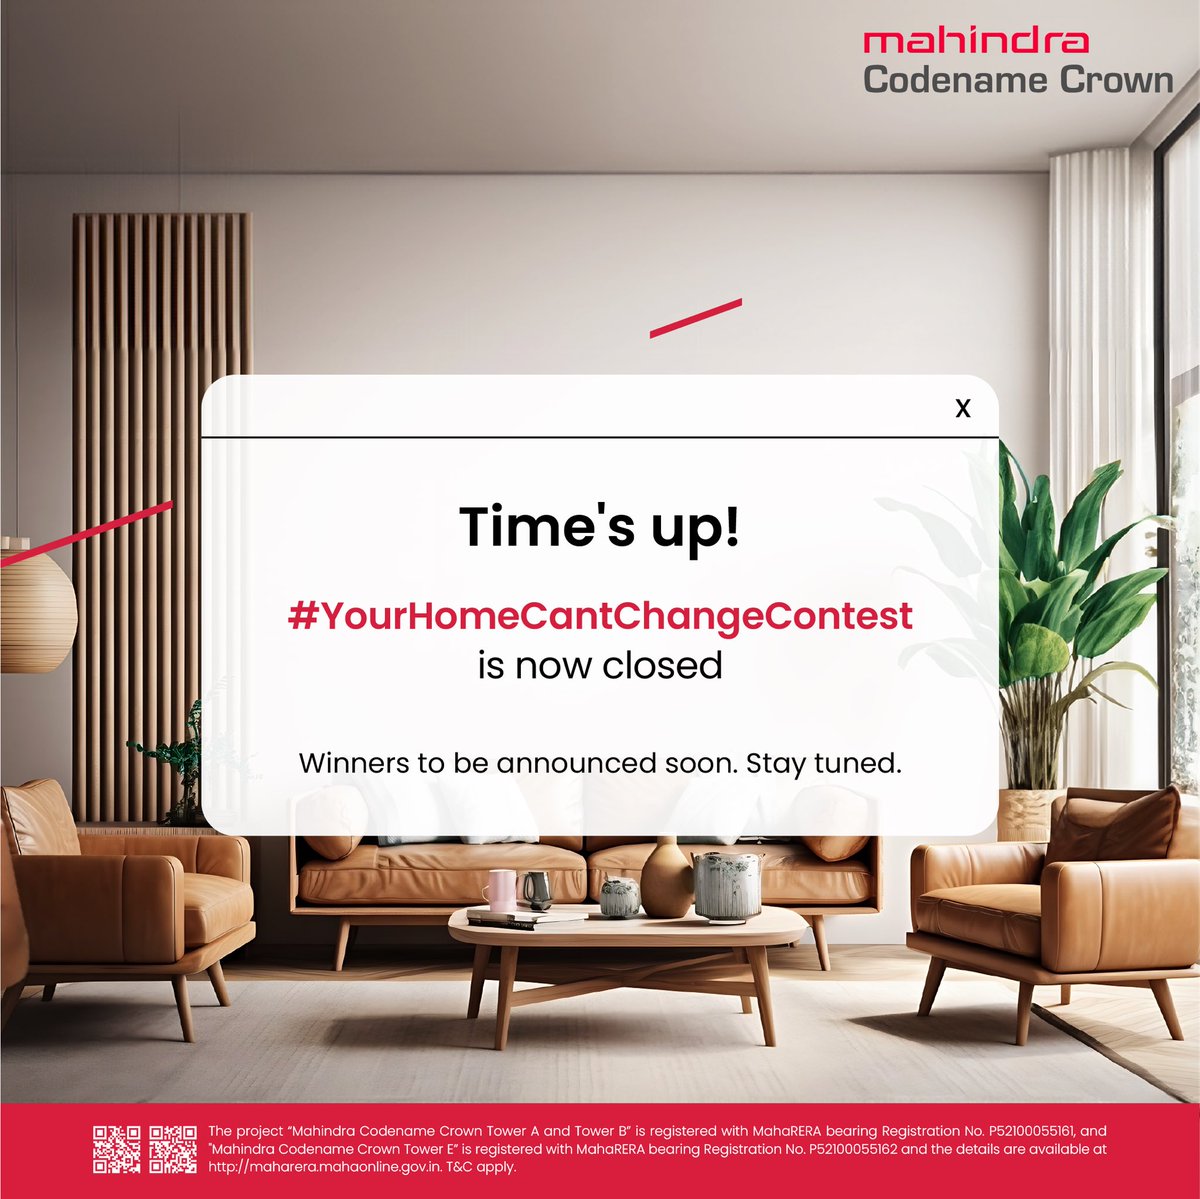 Reading your homebuying tips and advice has been immensely insightful over the past few days. Stay tuned for the announcement of the winners chosen via a lucky draw. #YourHomeCantChangeContest!

#MahindraLifespaces #CraftingLife #MahindraCodenameCrown